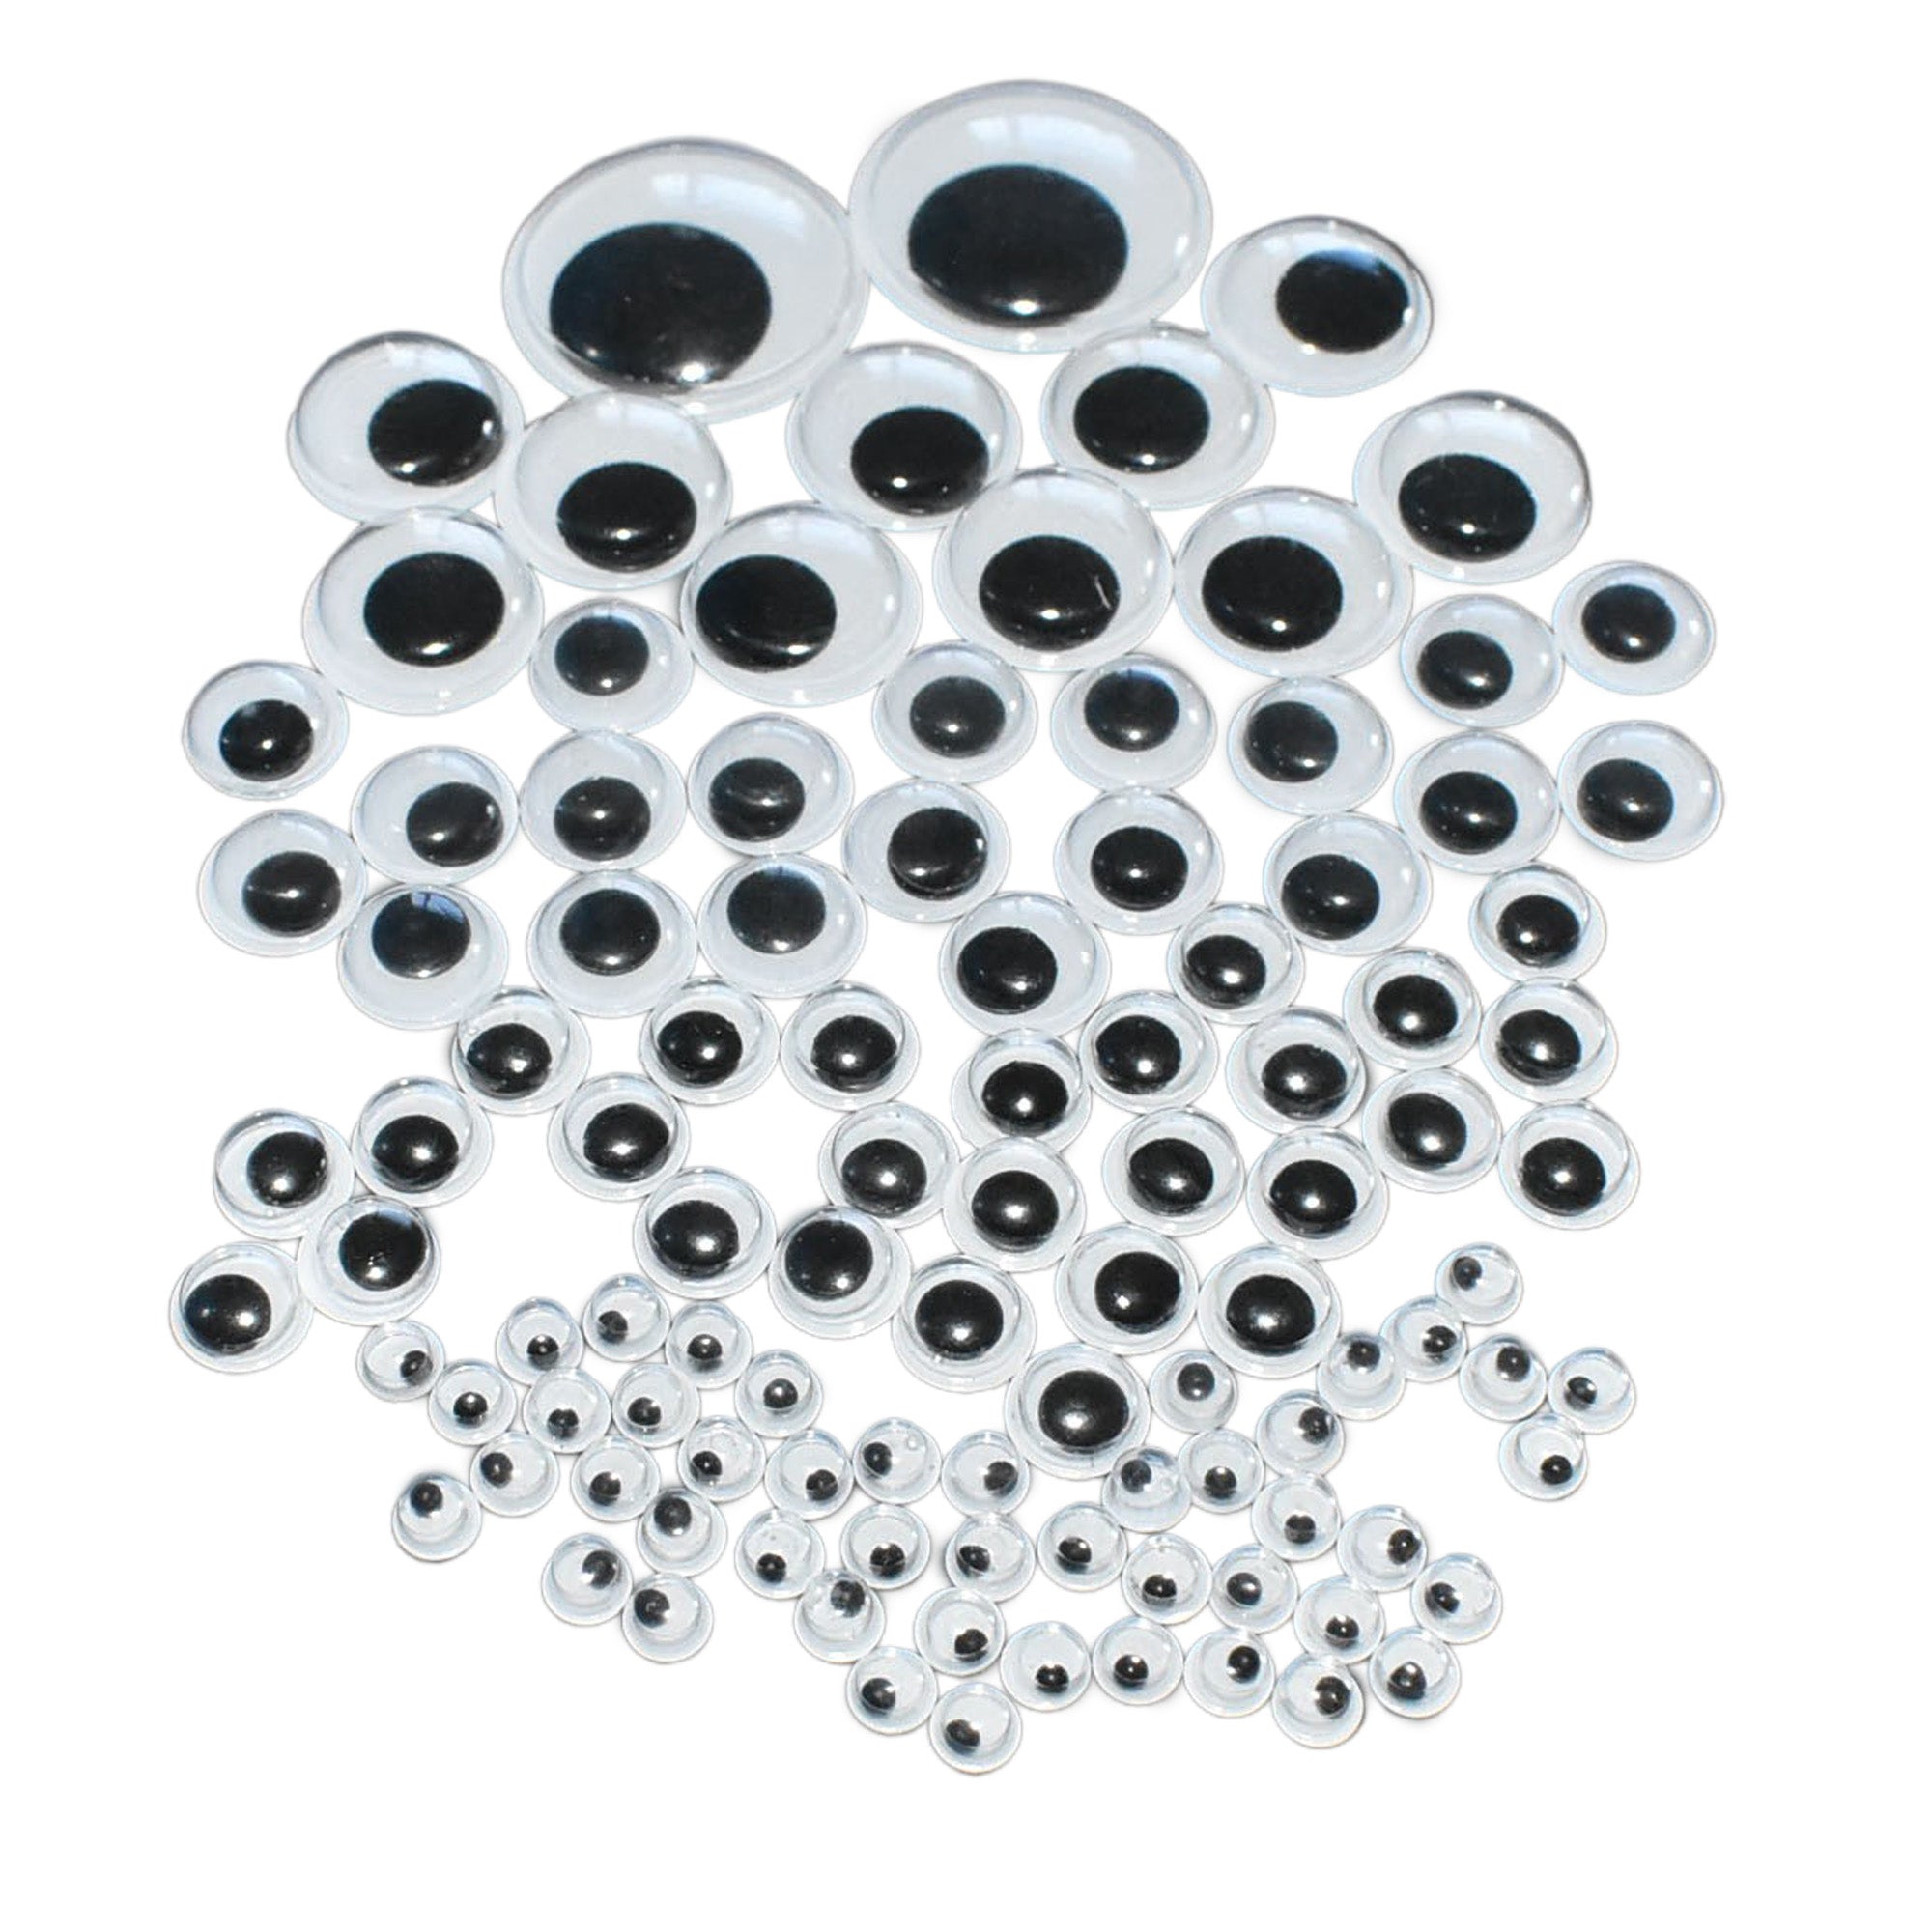 Homeford Large Self Adhesive Googly Eyes, White, 6-Inch, 2-Count